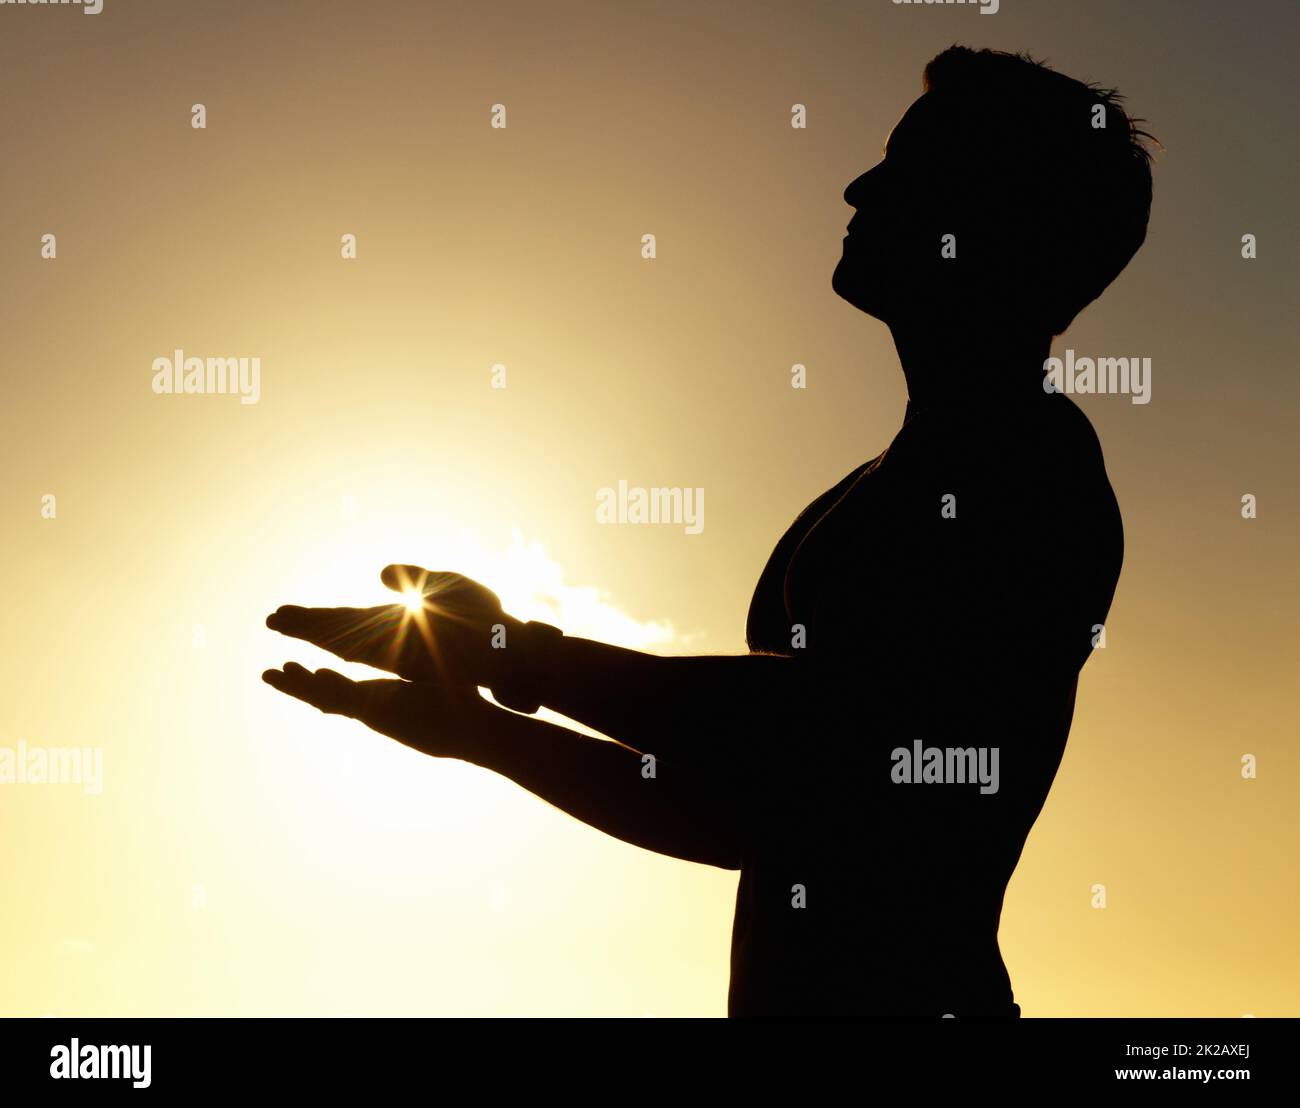 Salutation to the sun. A silhouette of a man standing calmly with his hands raised. Stock Photo